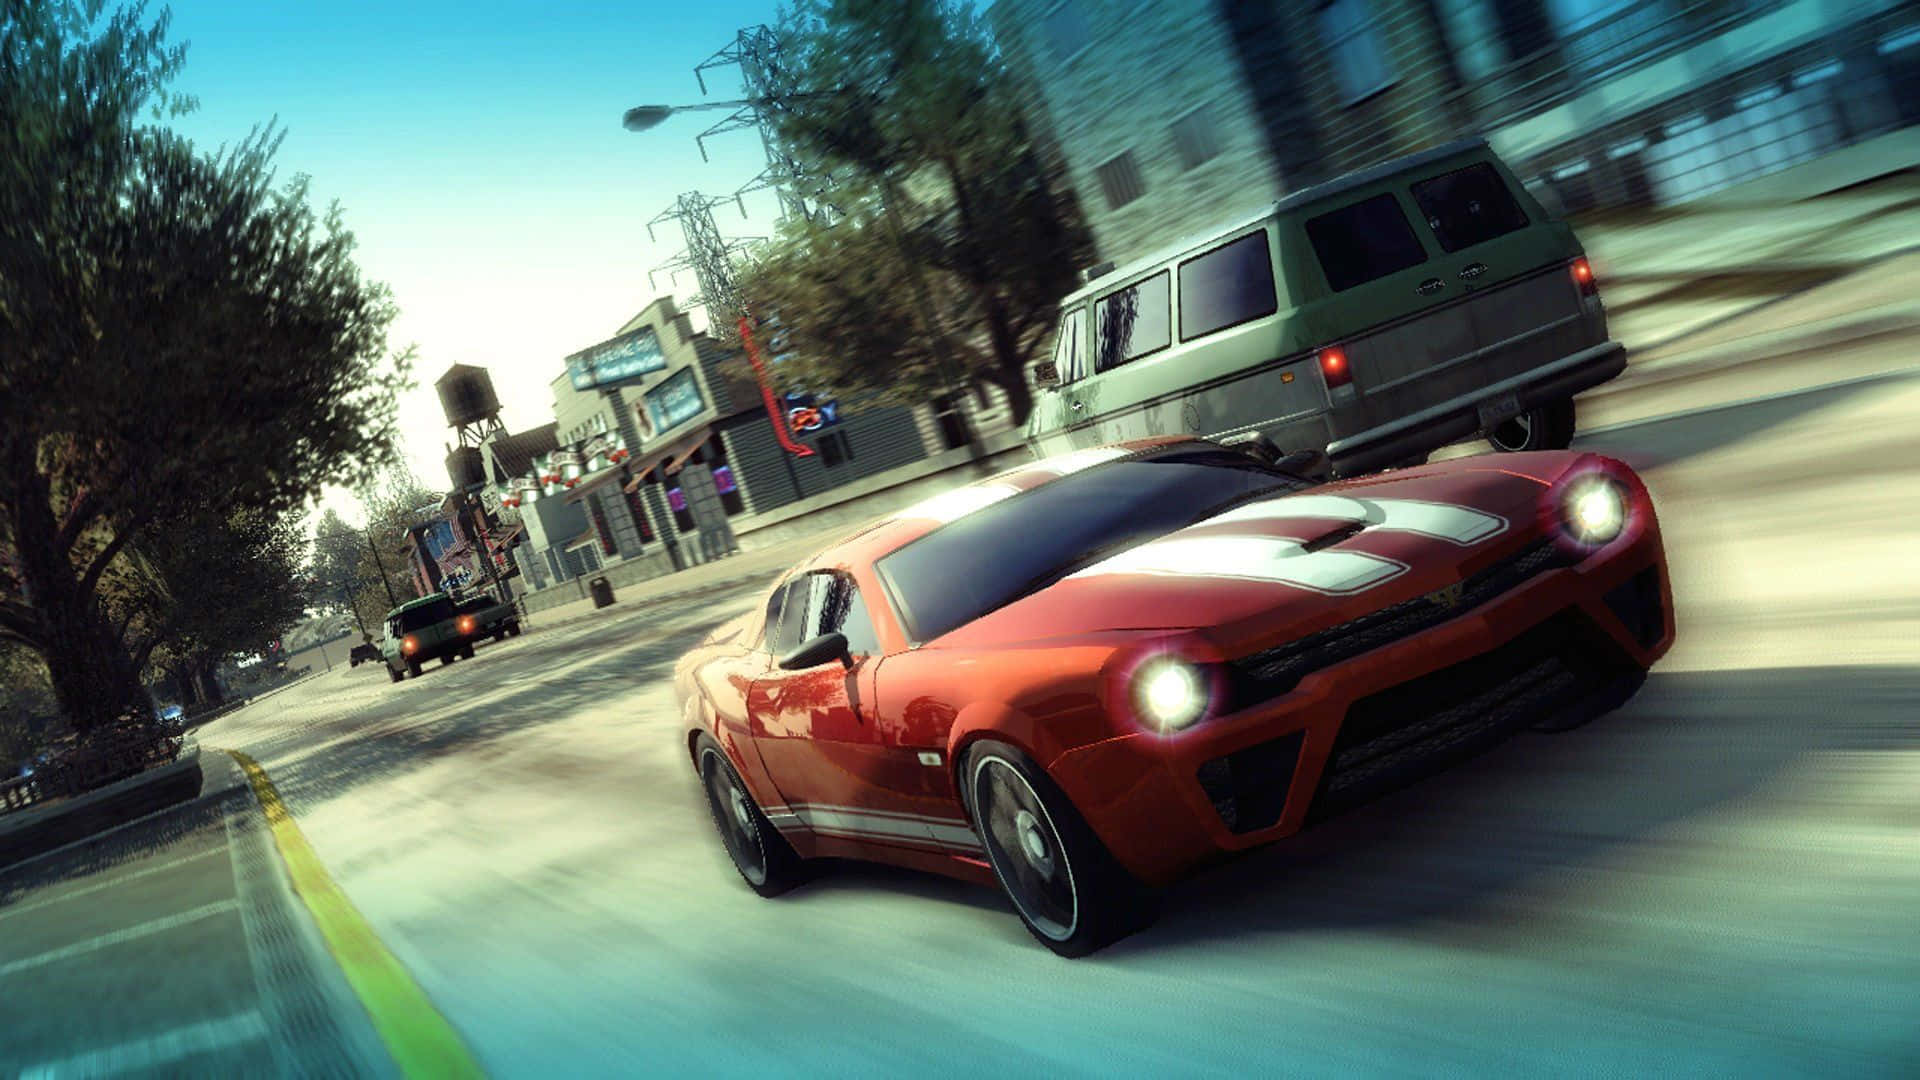 Captivating Racing Game Action Wallpaper